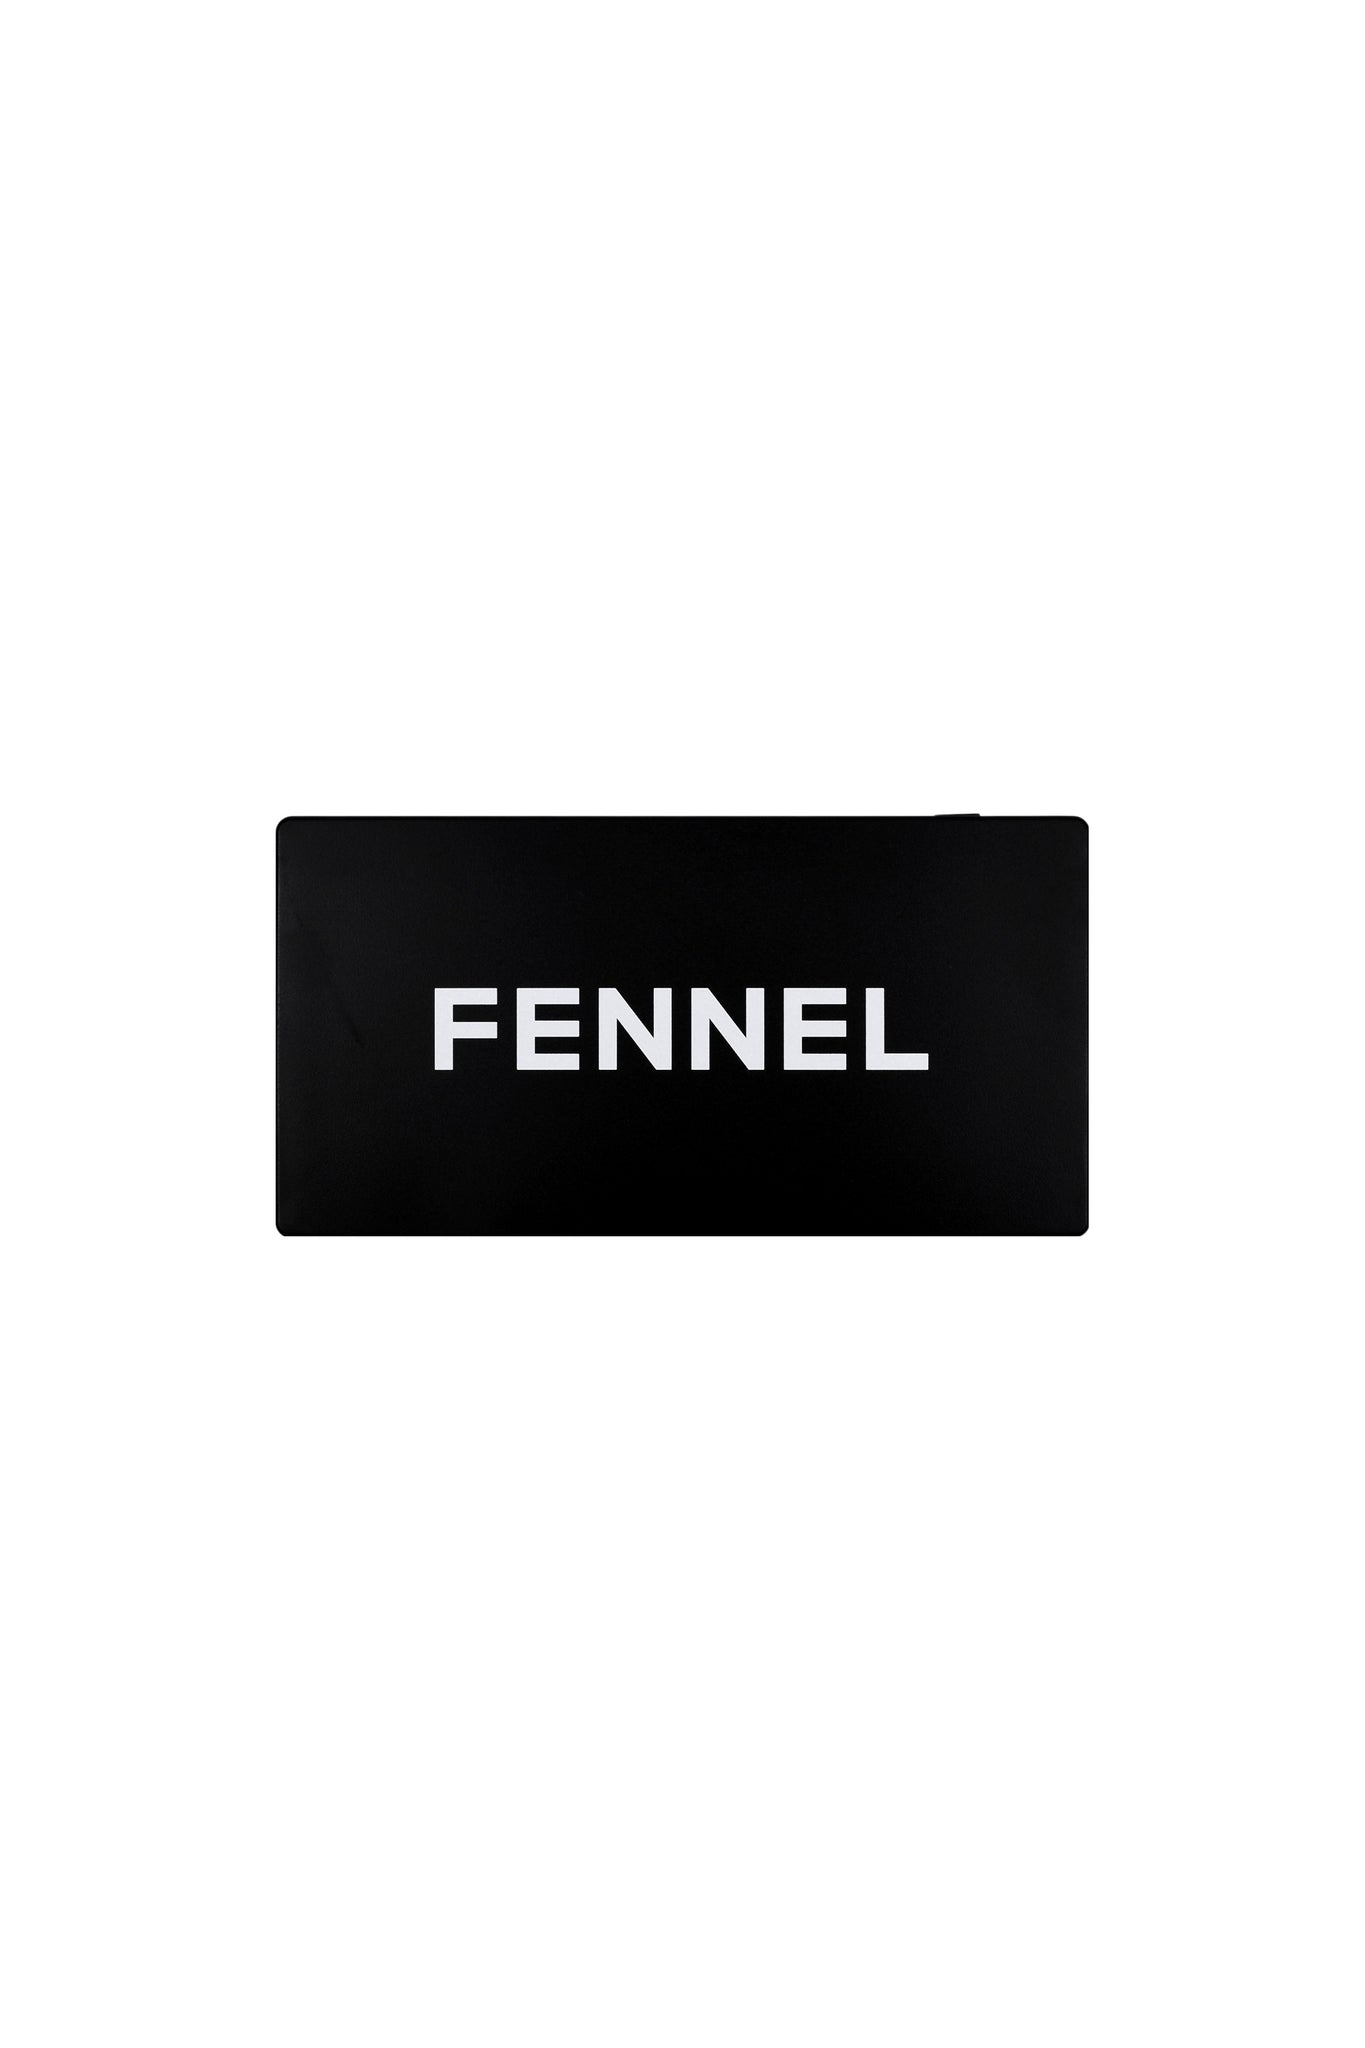 LIMITED SALE – FENNEL OFFICIAL EC STORE